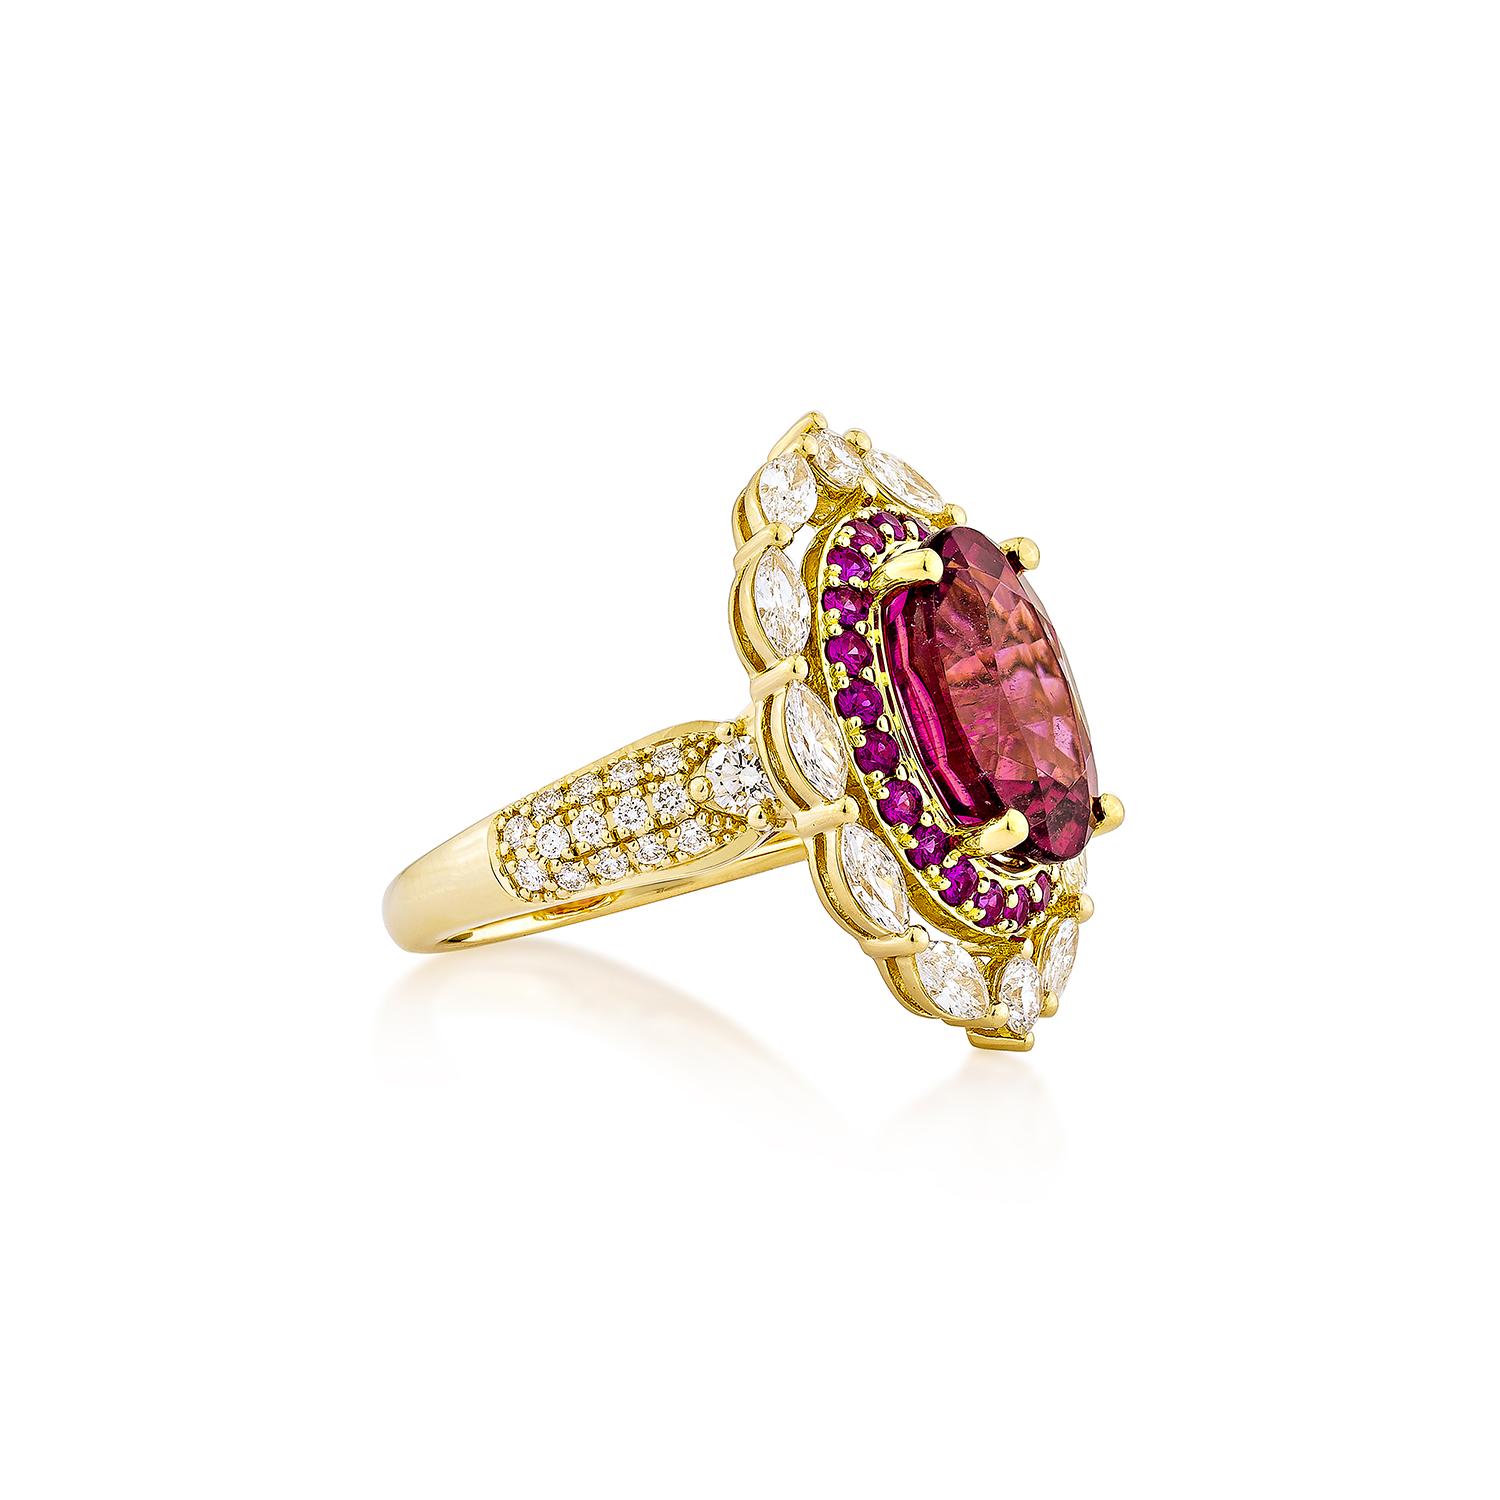 Sunita Nahata showcases an exquisite diamond studded Rubellite ring that exudes grace and elegance. This exquisite 18Karat yellow gold ring is ideal for any special occasion because it combines traditional elegance with modern flair.

Rubellite